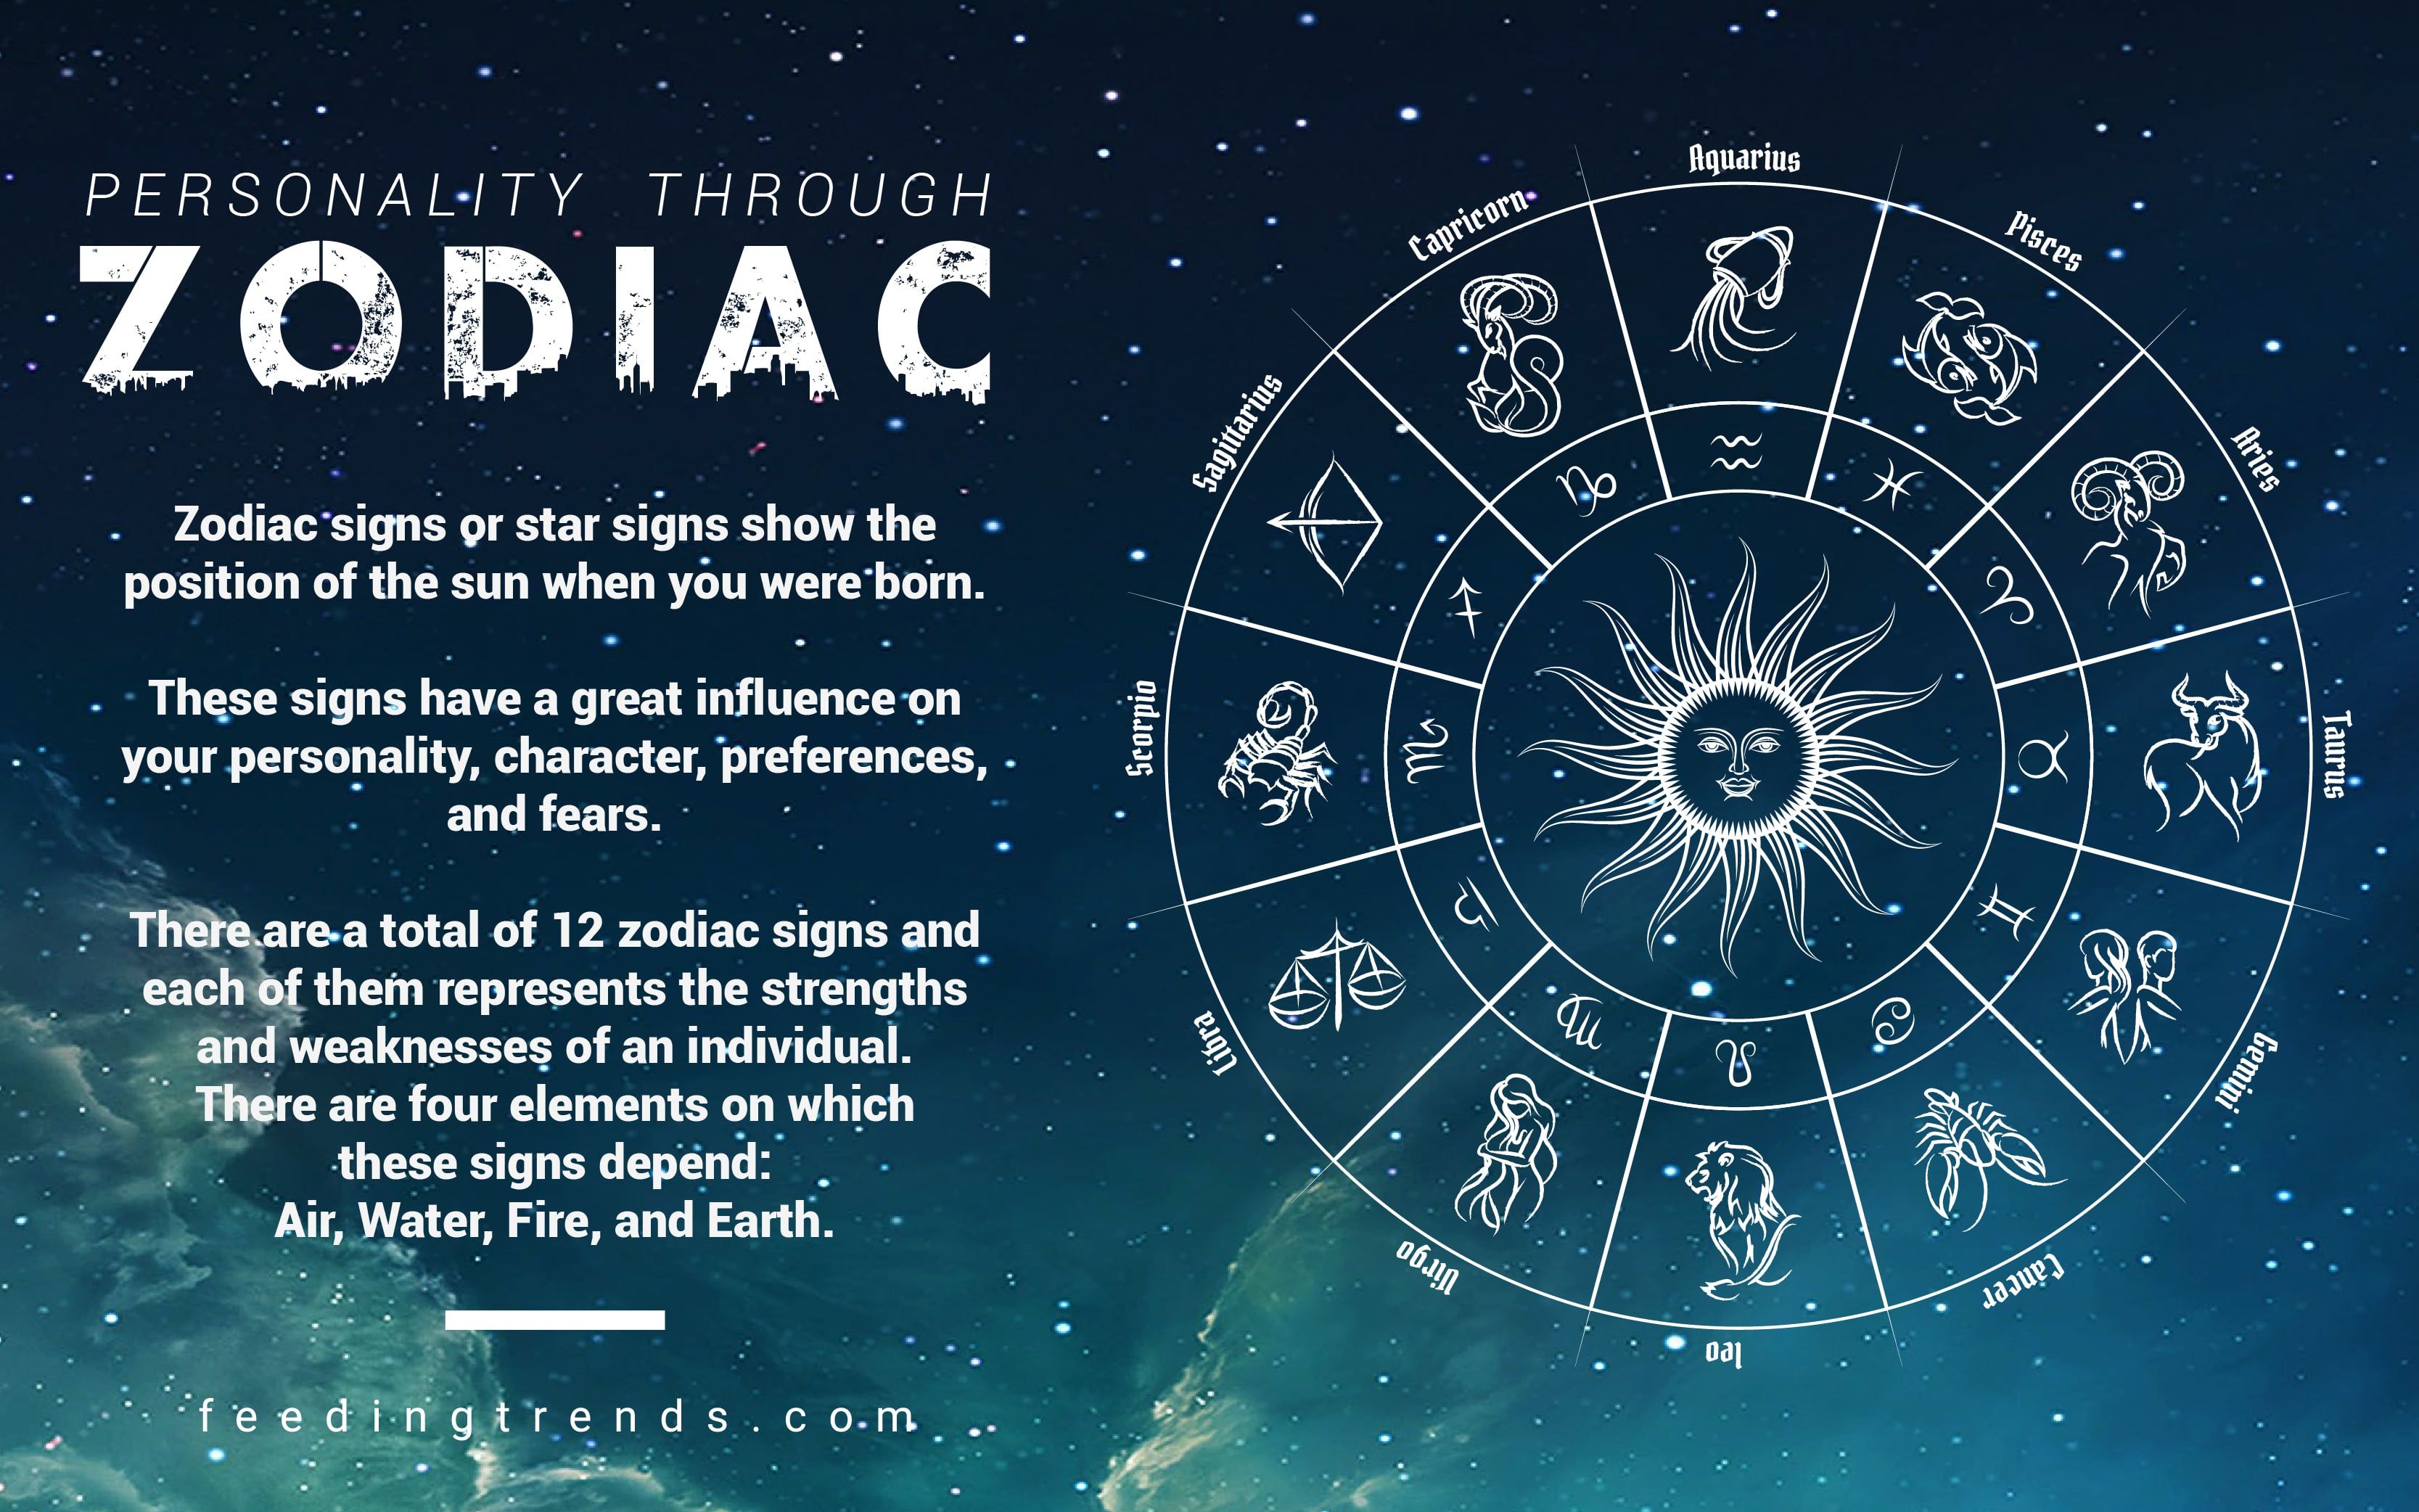 Overview Of The 12 Zodiac Signs